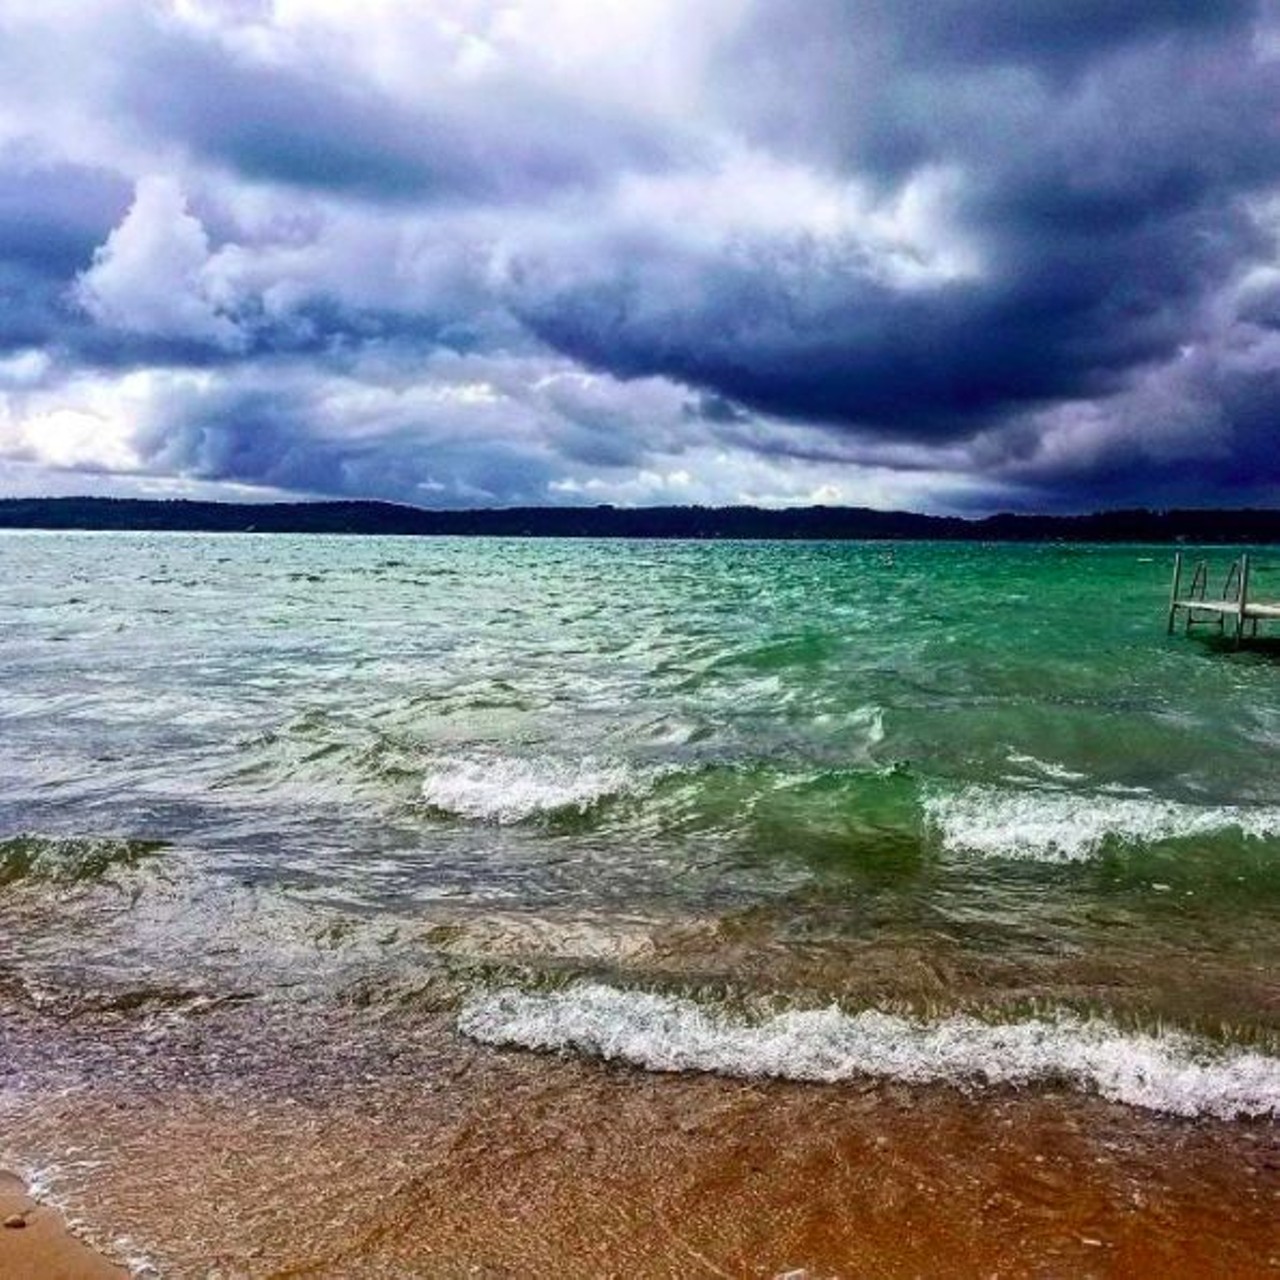 Torch Lake
Torch Lake Township; 4 hours, 6 minutes
If you&#146;re willing to look, you&#146;ll find a couple public beaches along Michigan&#146;s largest inland lake. We recommend visiting William K. Good Day Park or shores in the nearby town of Alden. Free.
Photo via IG user  @us31life